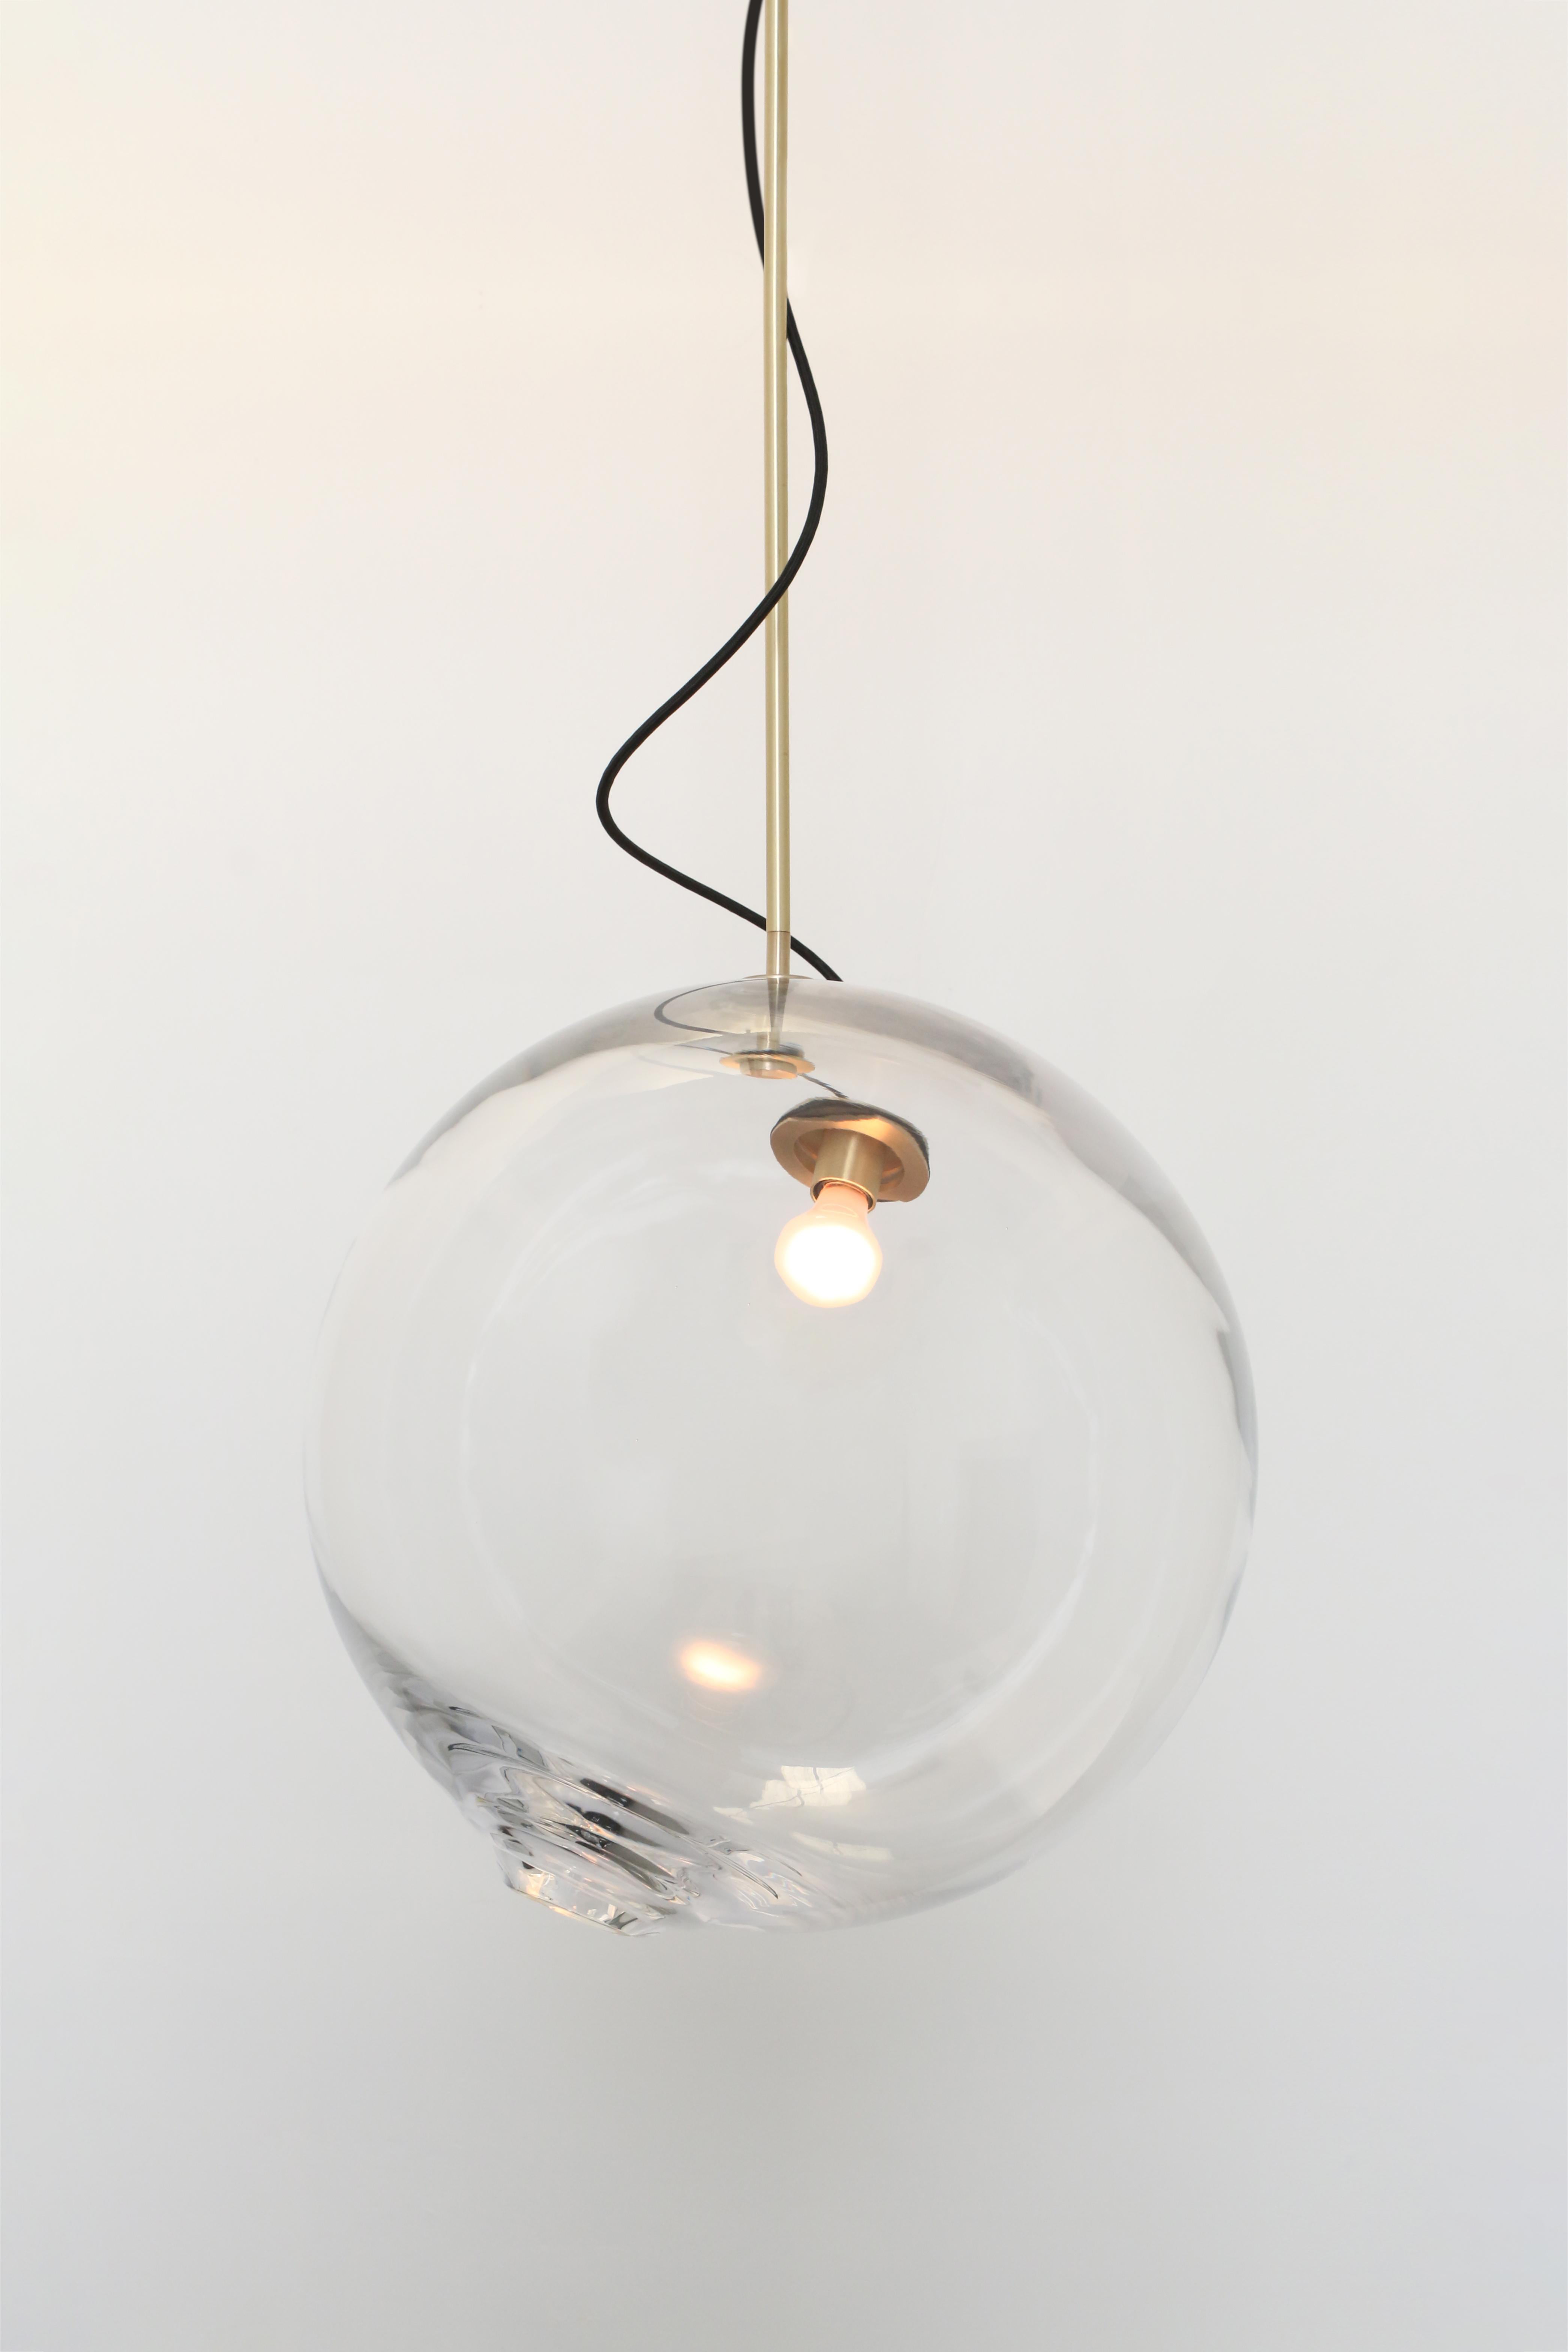 Large spheres of handblown Czech glass suspended on rigid brass stems. Two glass sizes available. A custom brass socket assembly through one side holds the light bulb and is connected to the canopy at the ceiling with a length of exposed